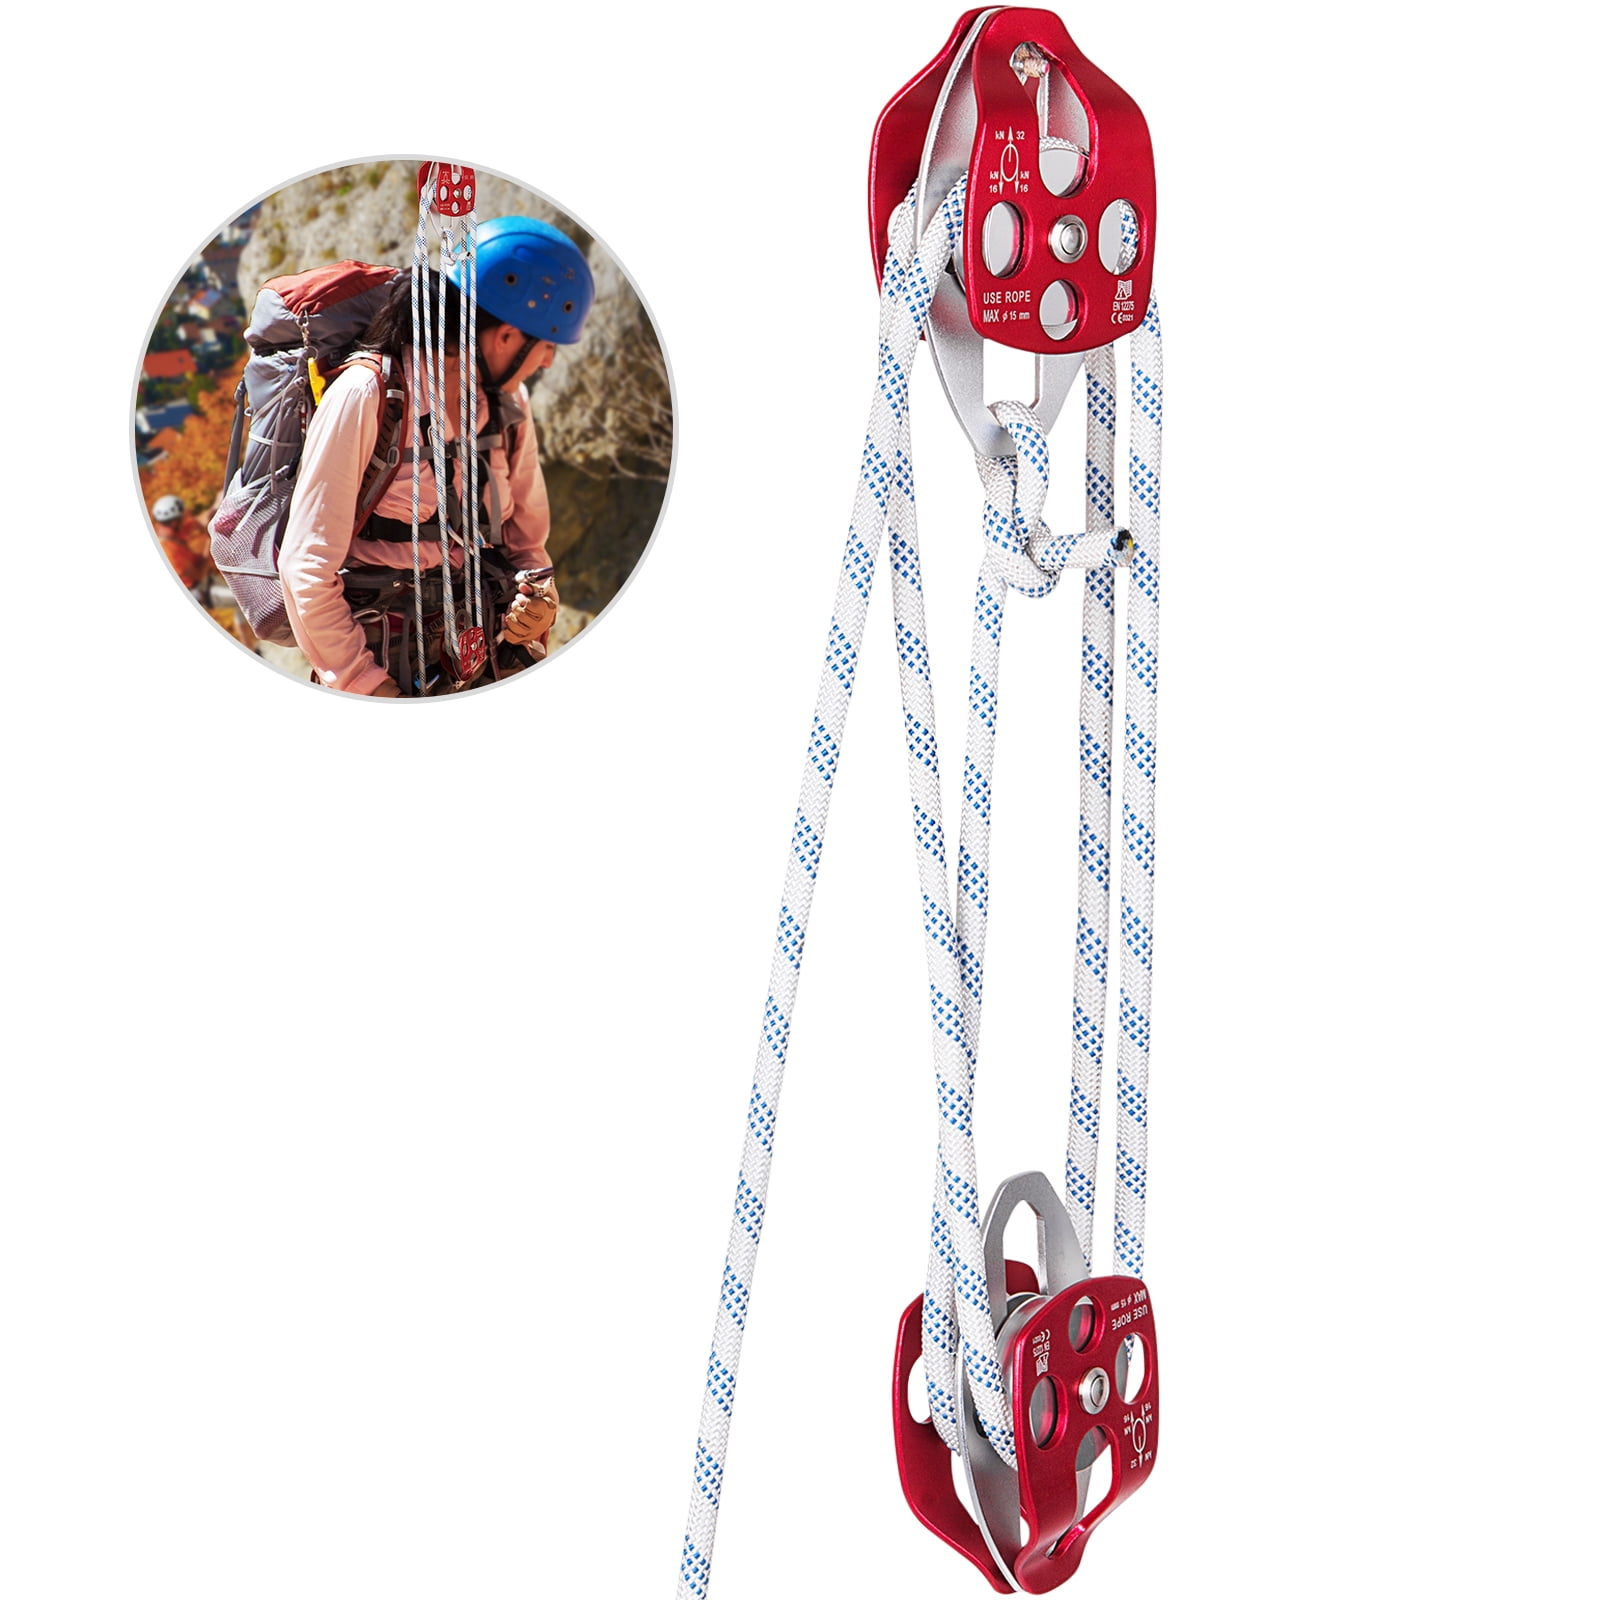 Poly Rope Hoist Pulley Wheel Block and Tackle Rigging Engine Lift Tool 400 LBS 